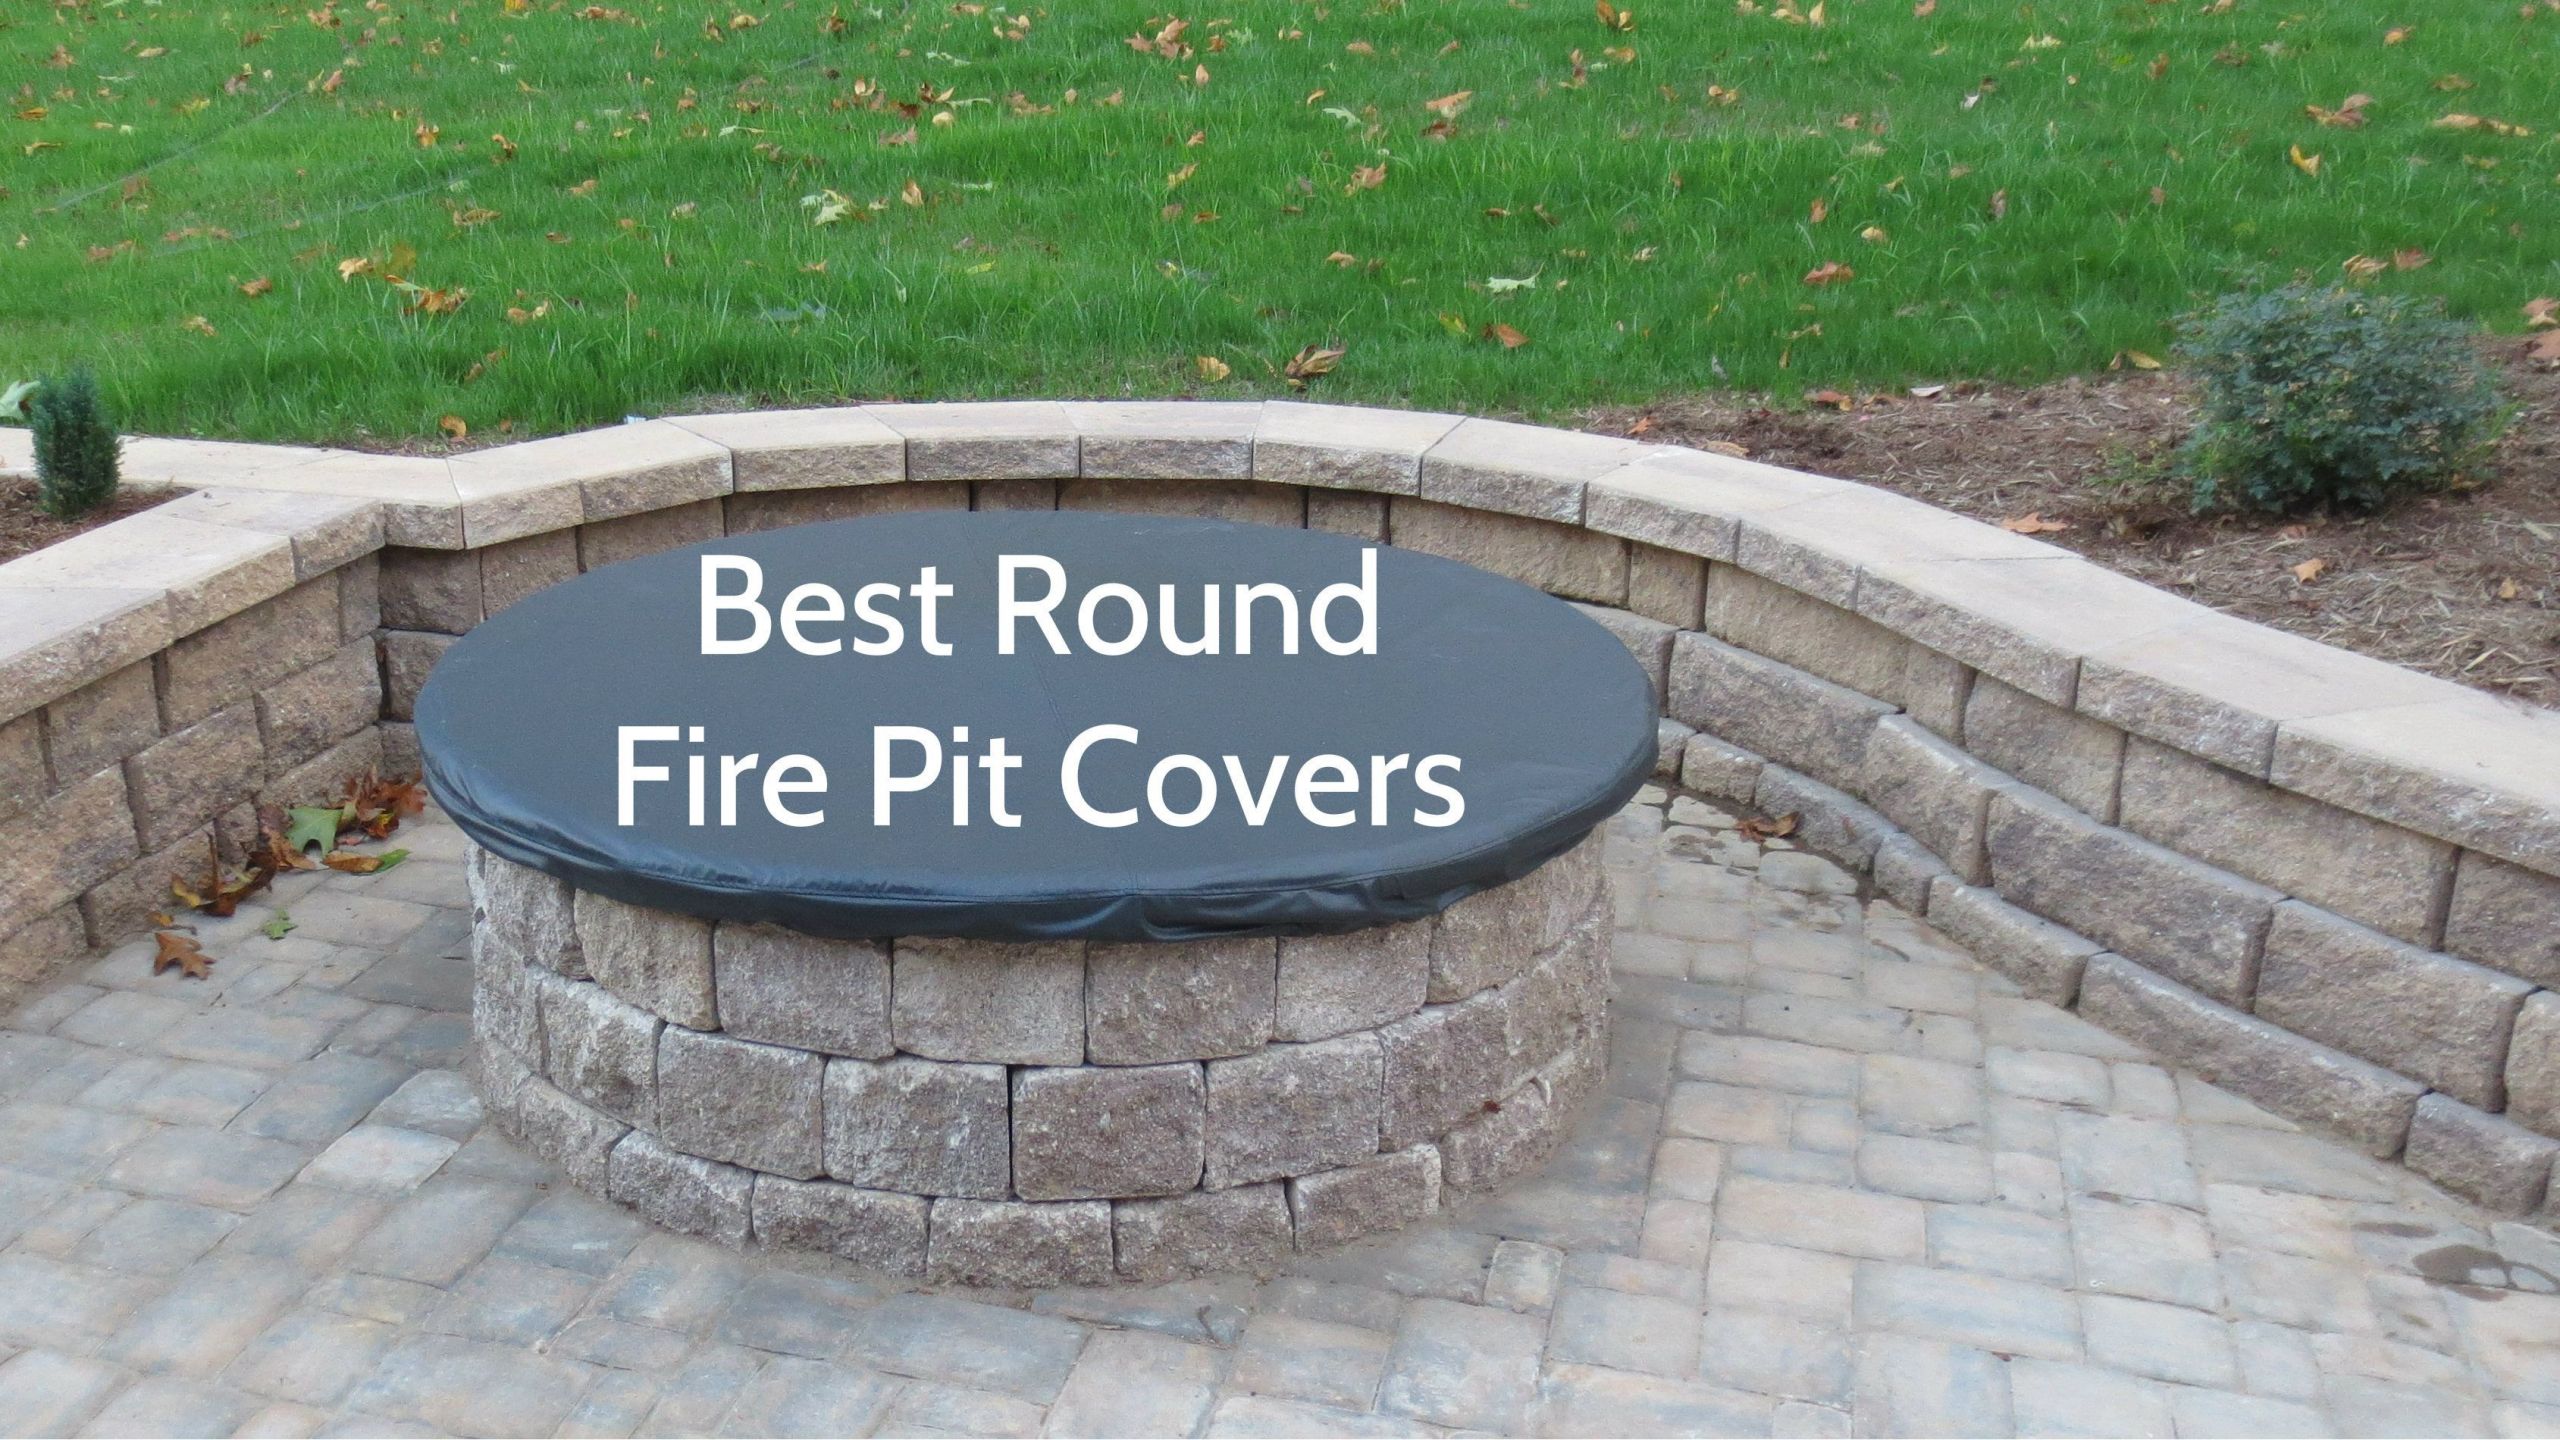 Round Firepit Cover
 Best Round Fire Pit Covers